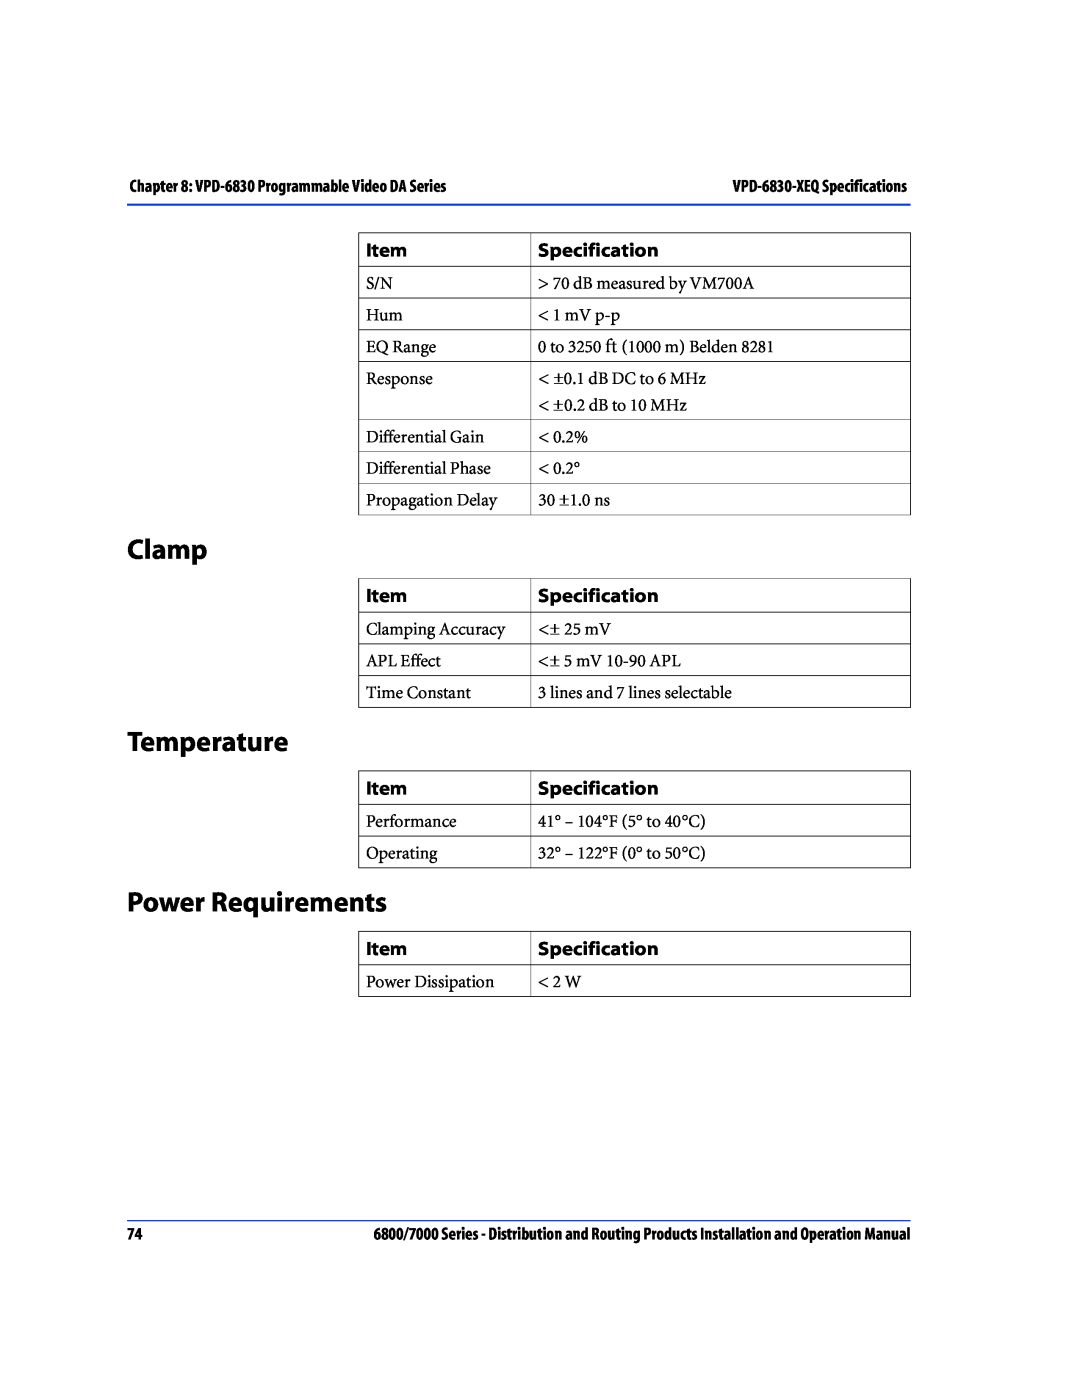 Nokia 7000 Series, 6800 Series operation manual Clamp, Temperature, Power Requirements, Specification 